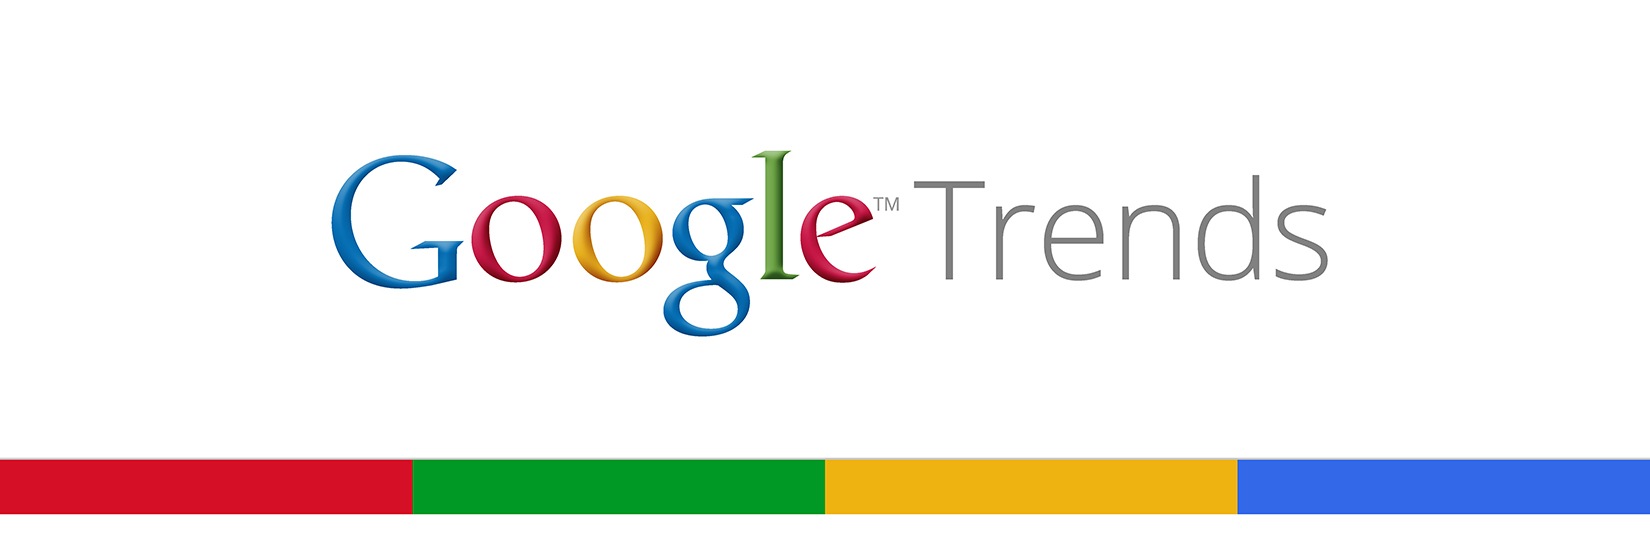 google trends debuts email